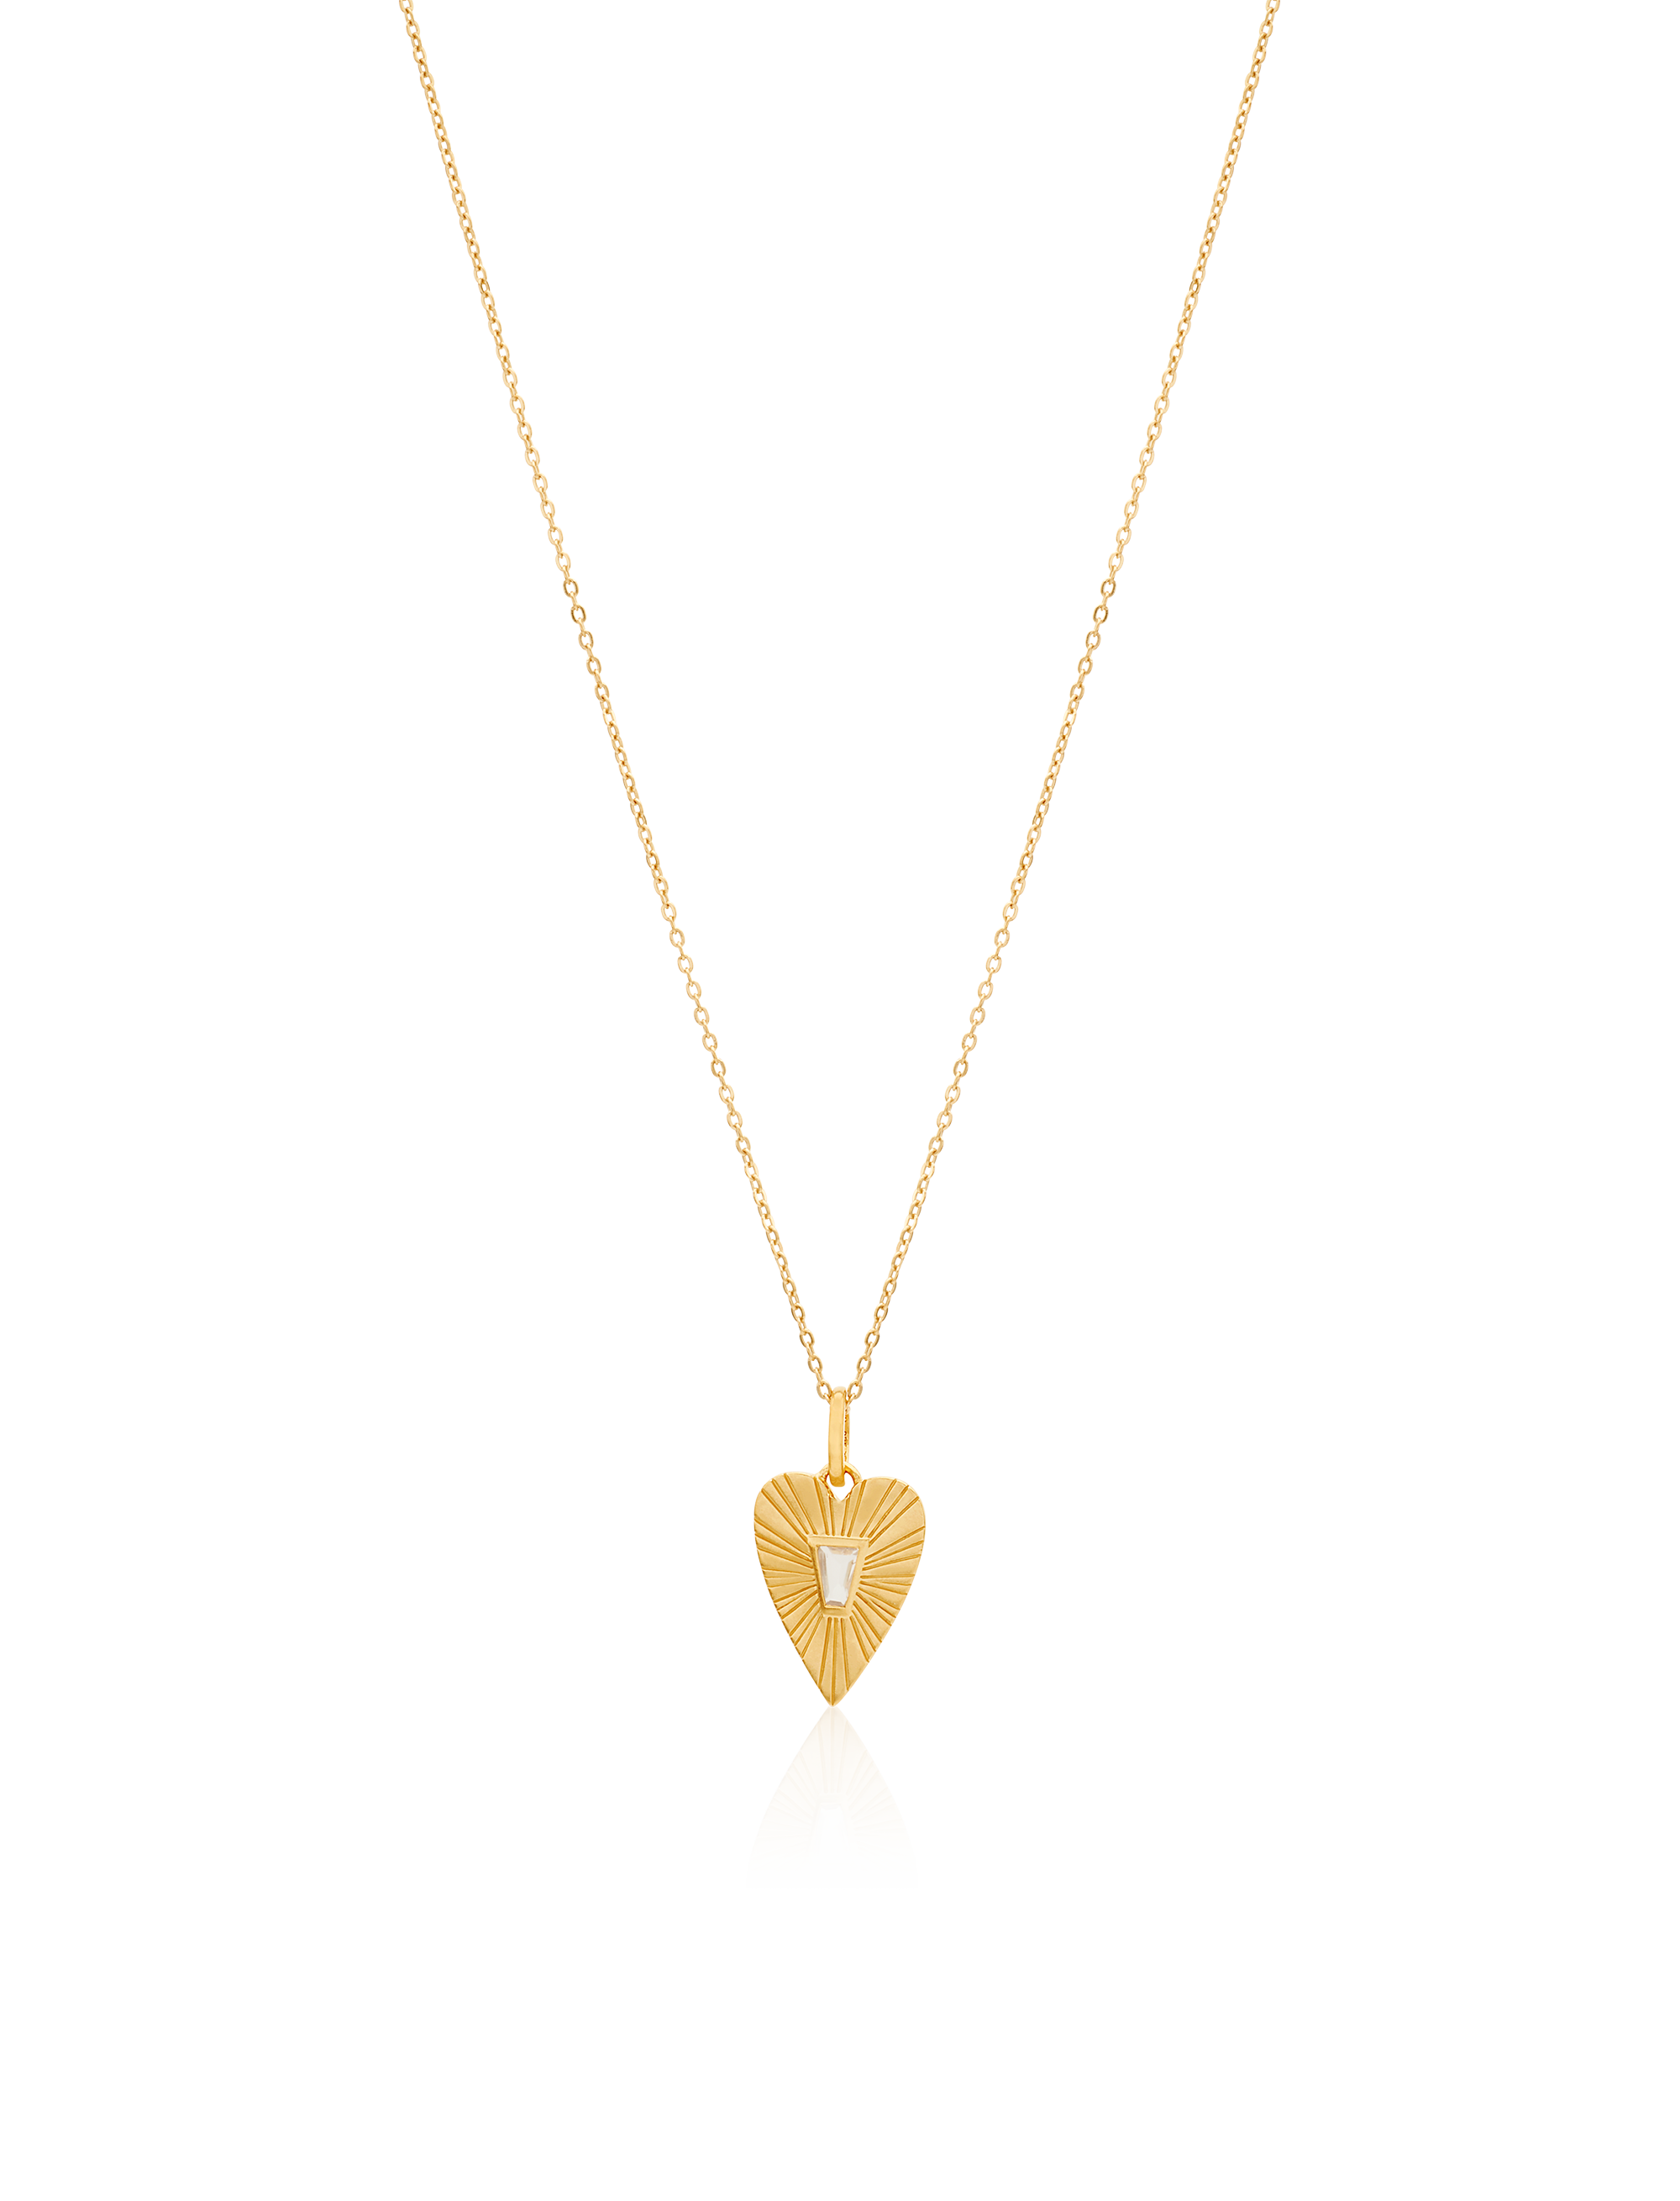 Radial Heart Stone Necklace – pleaserepeat